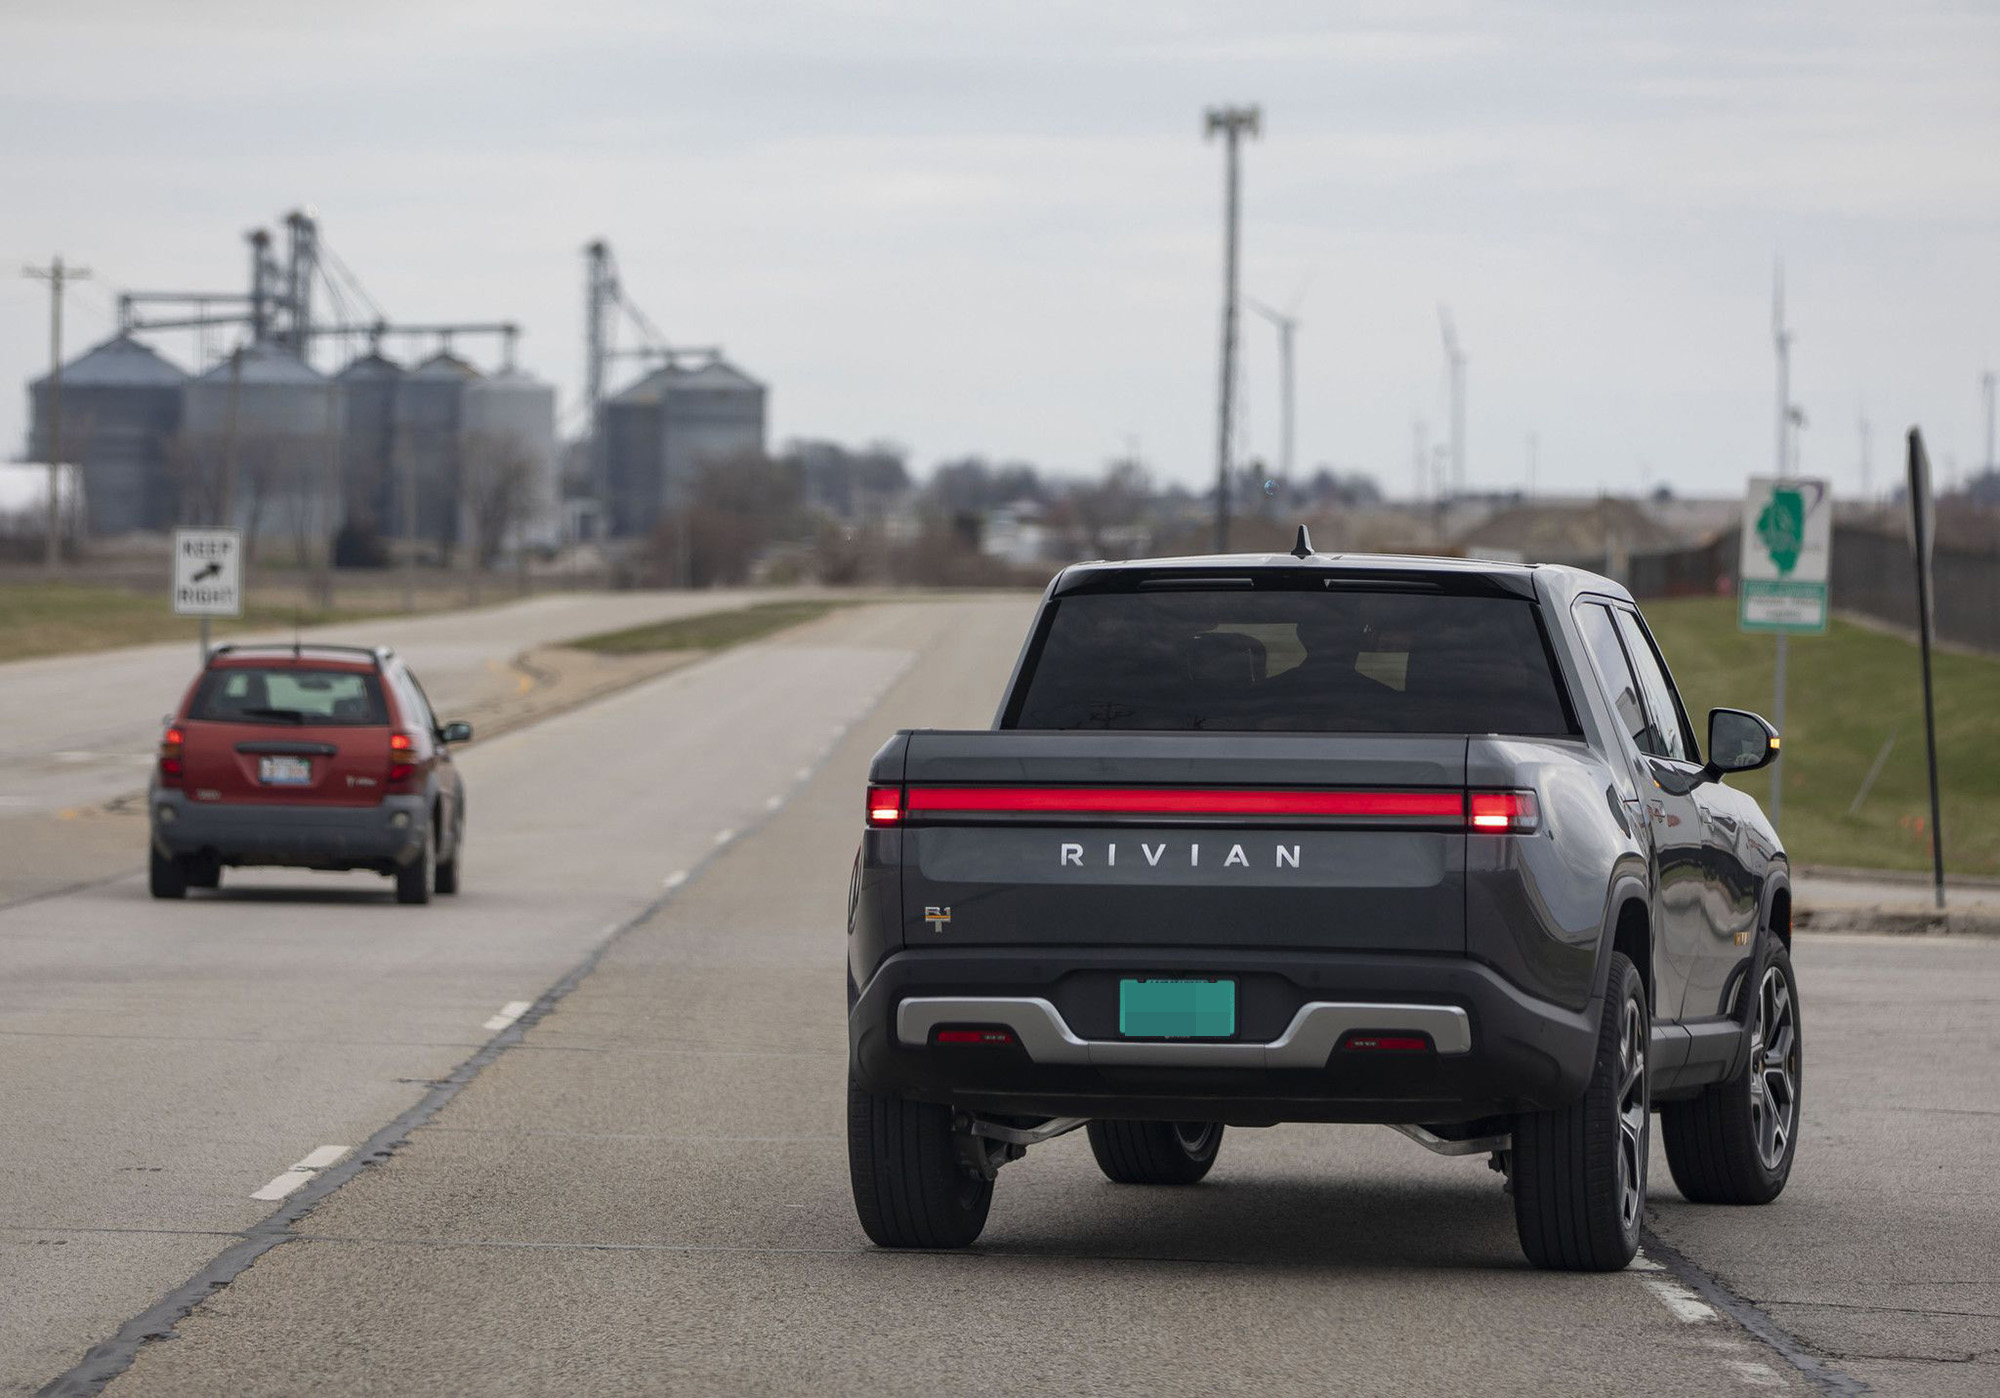 PHOTO: In this April 11, 2022, file photo, an R1T truck is shown on the road outside the Rivian electric vehicle plant in Normal, Il.